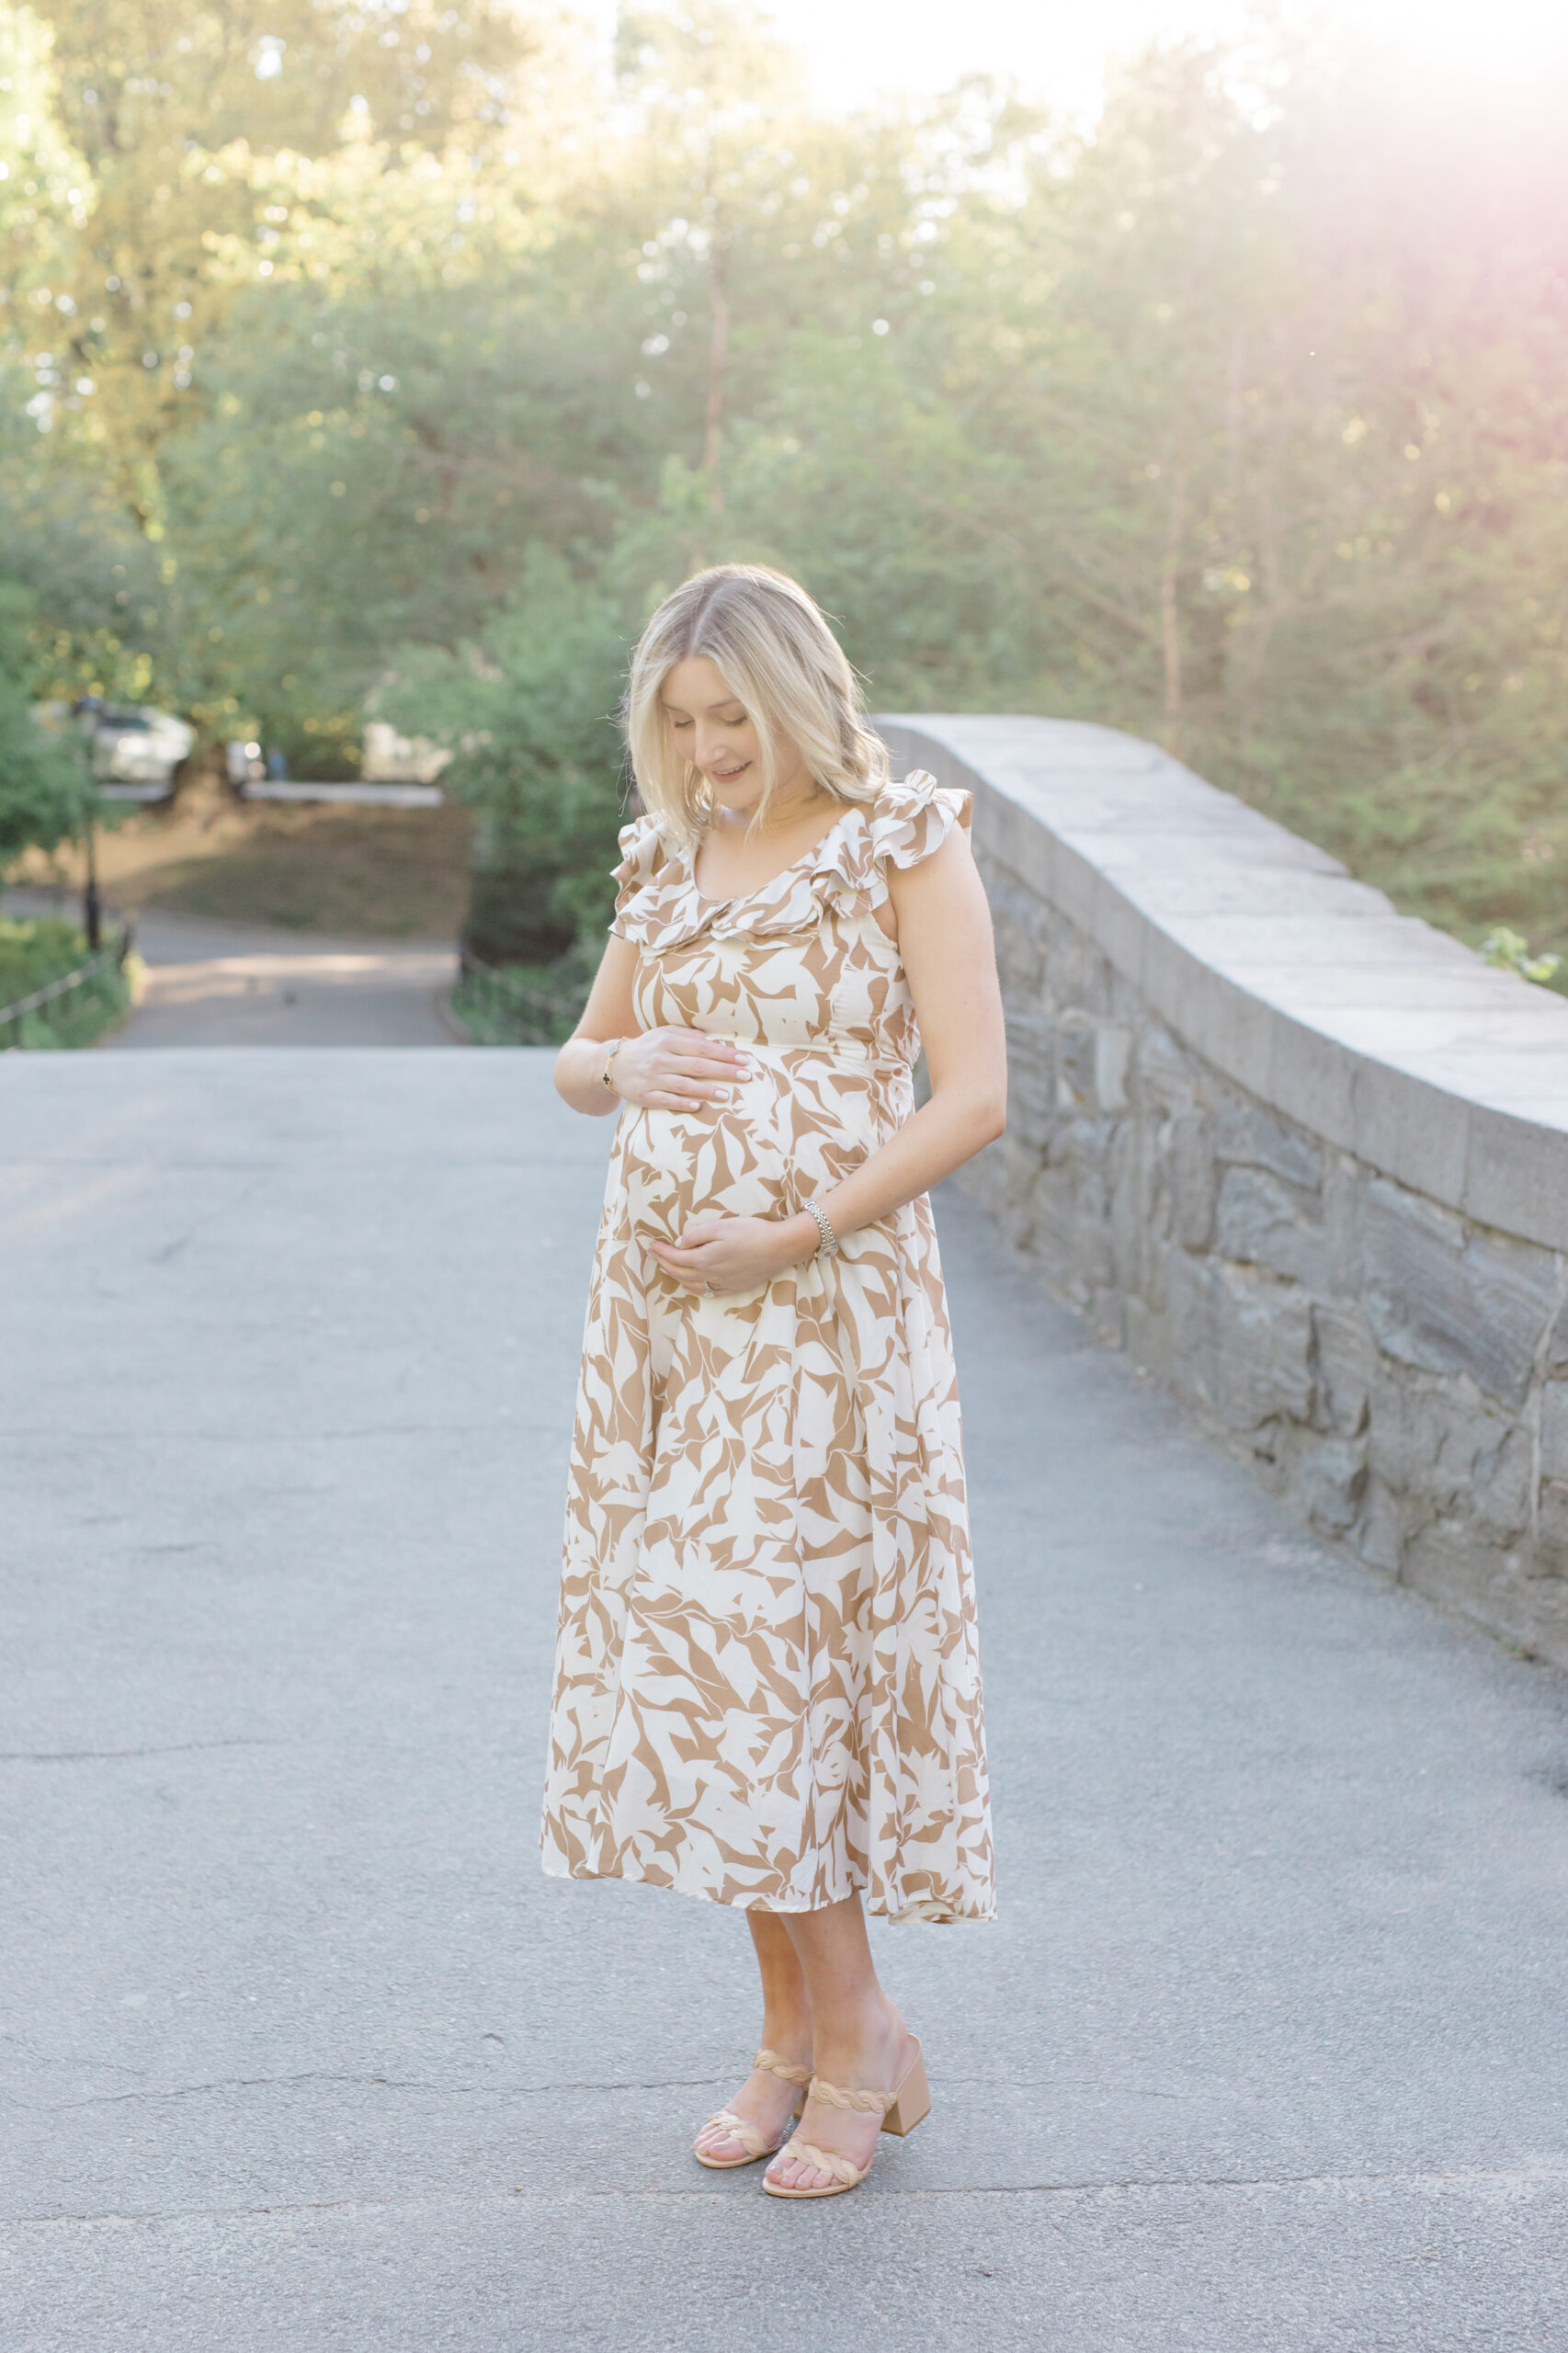 An expecting mom looks at her baby bump on Gapstow Bridge at a maternity photo session in Central Park shot by Jacqueline Clair Photography